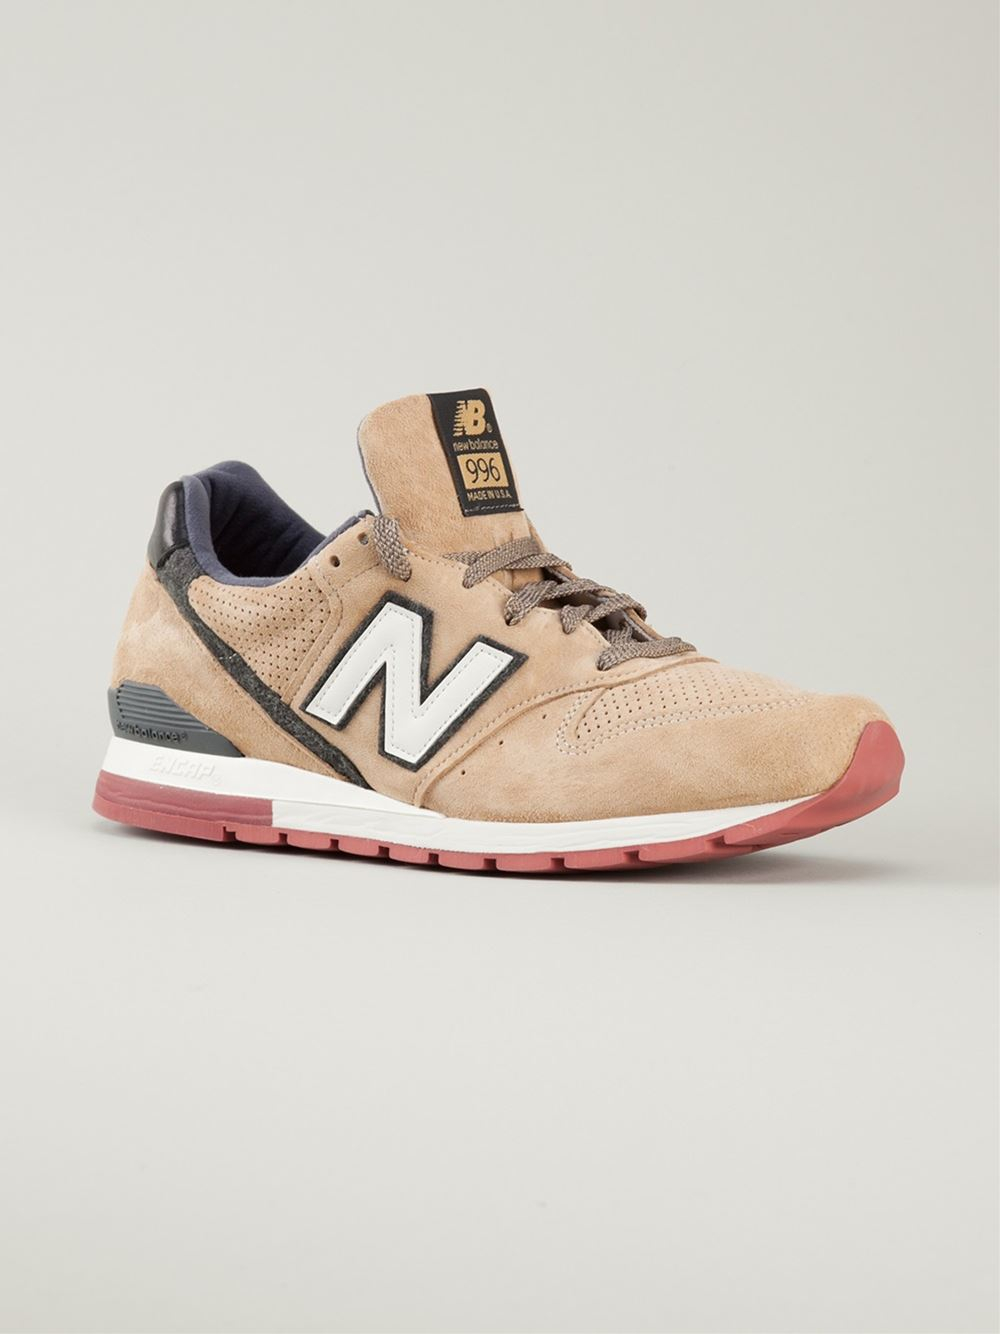 New Balance '996 Pr' Classic Trainers in Brown for Men - Lyst